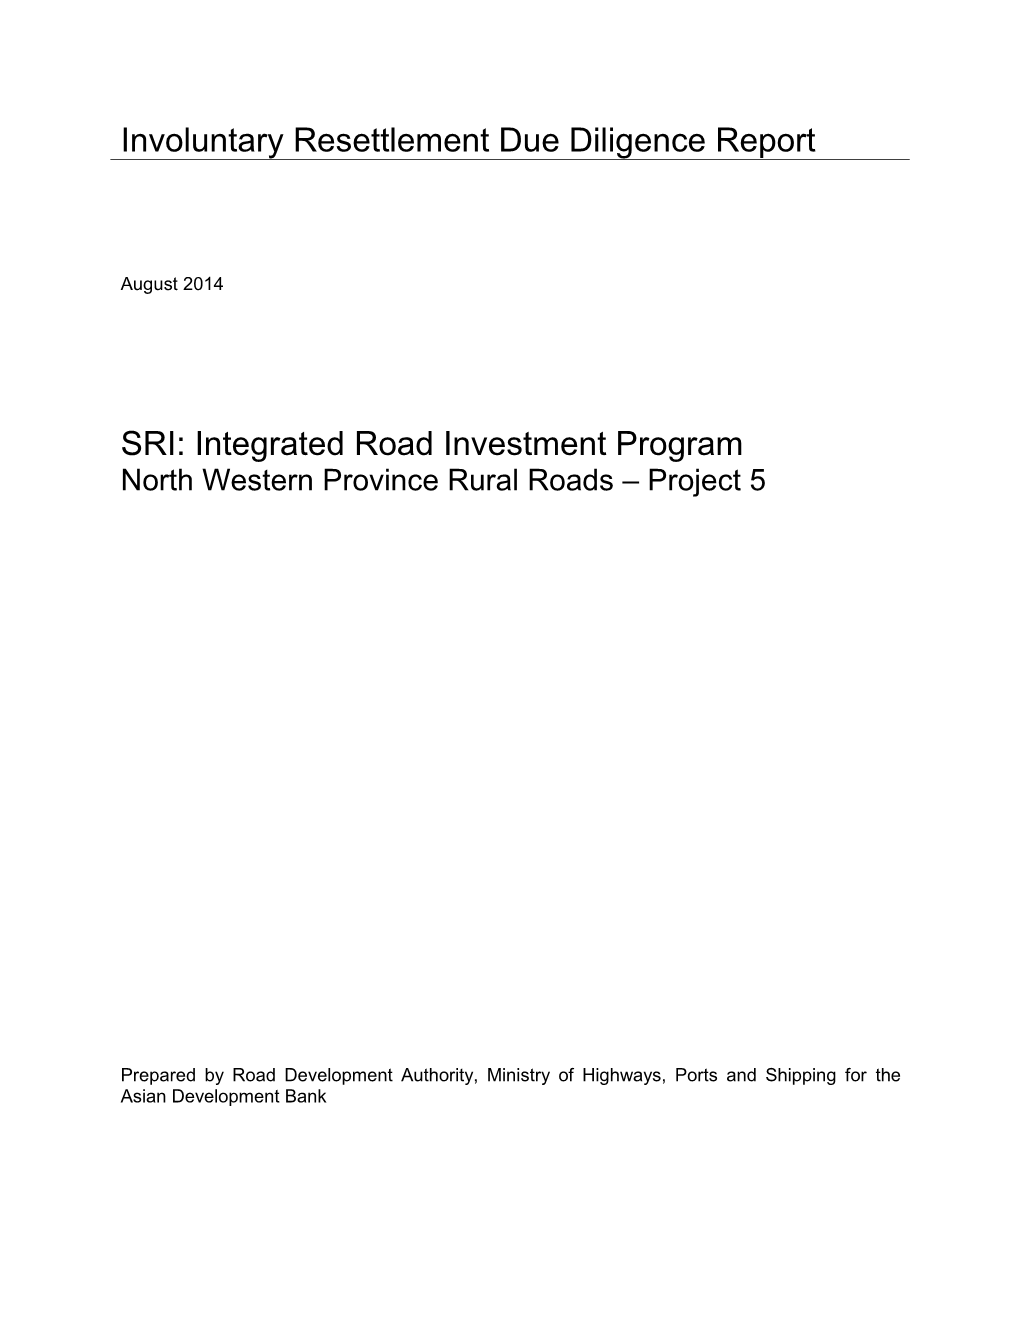 North Western Province Rural Roads – Project 5